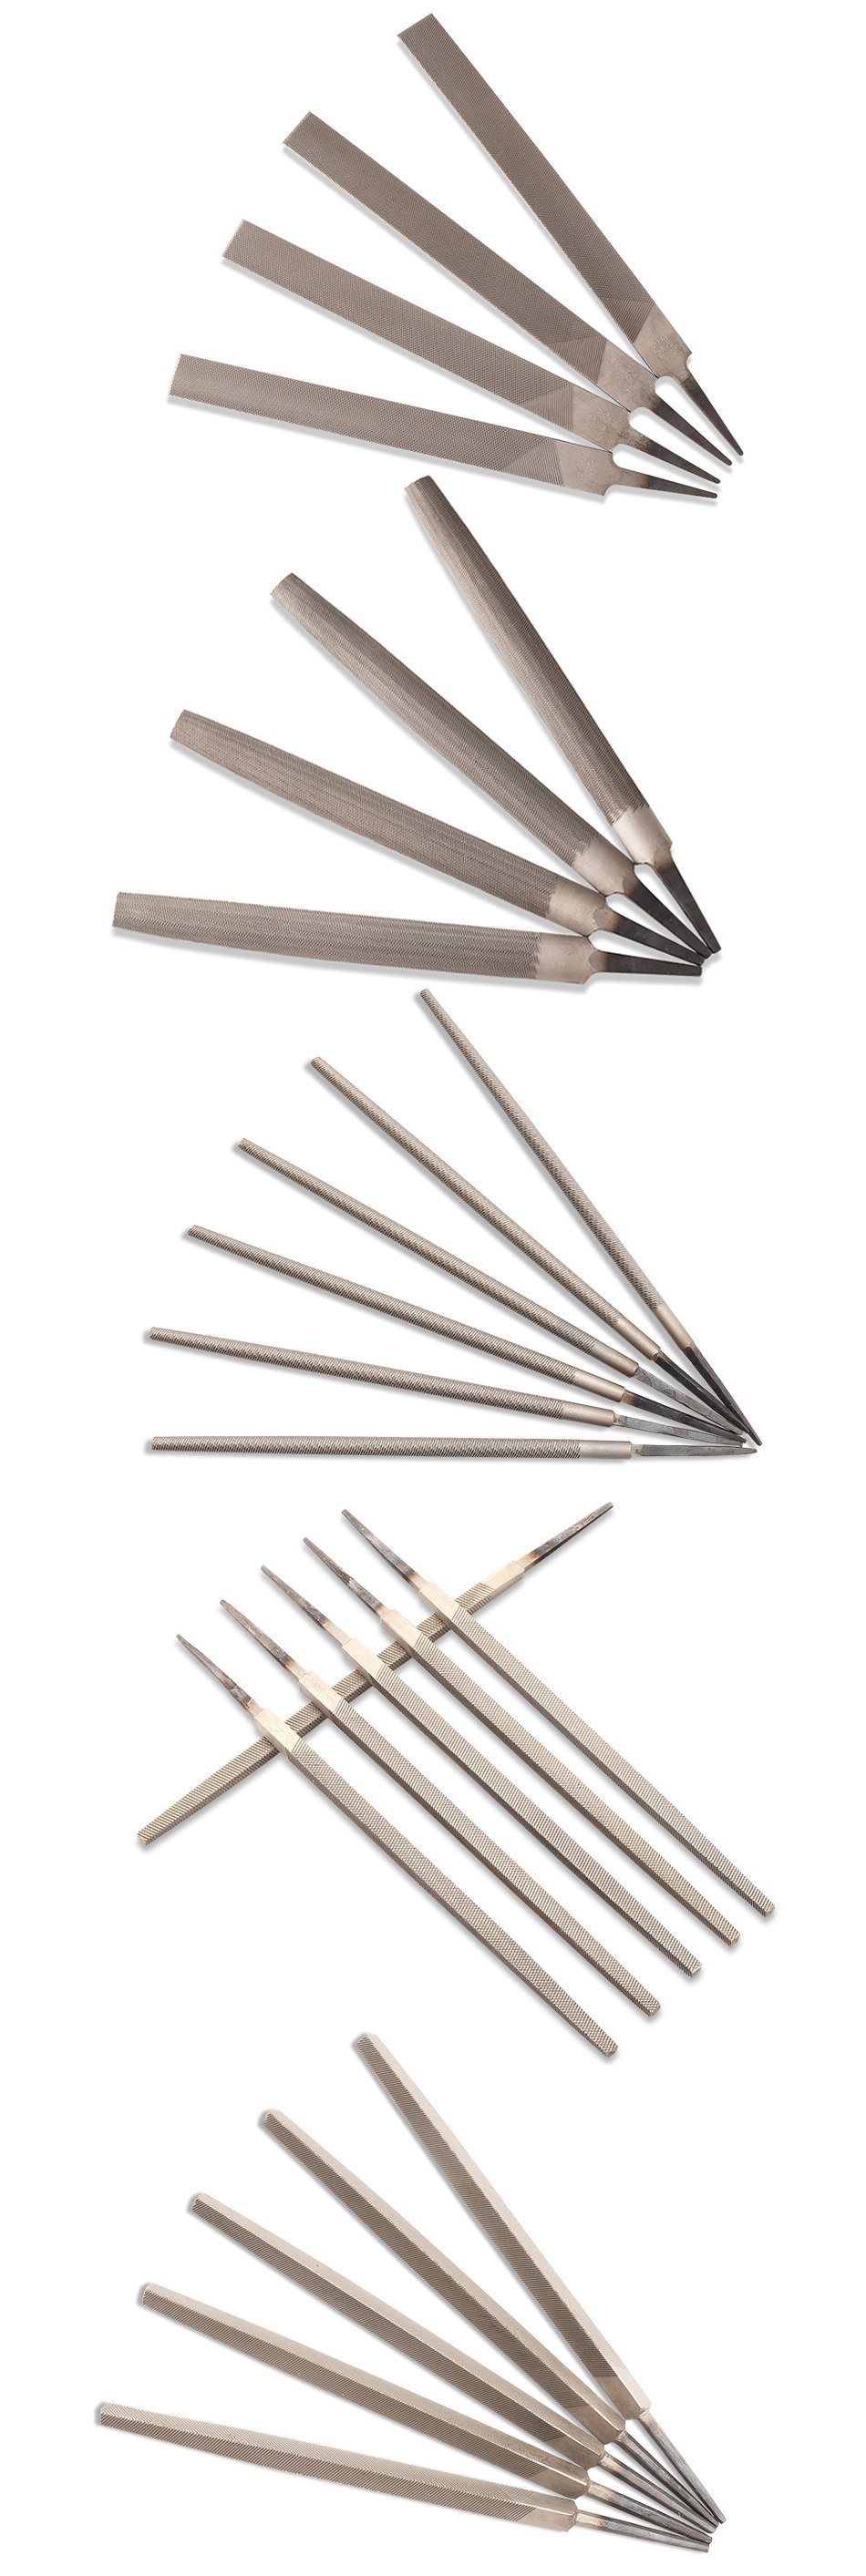 Free Sample Steel Hand Tools American Made Files and Rasps